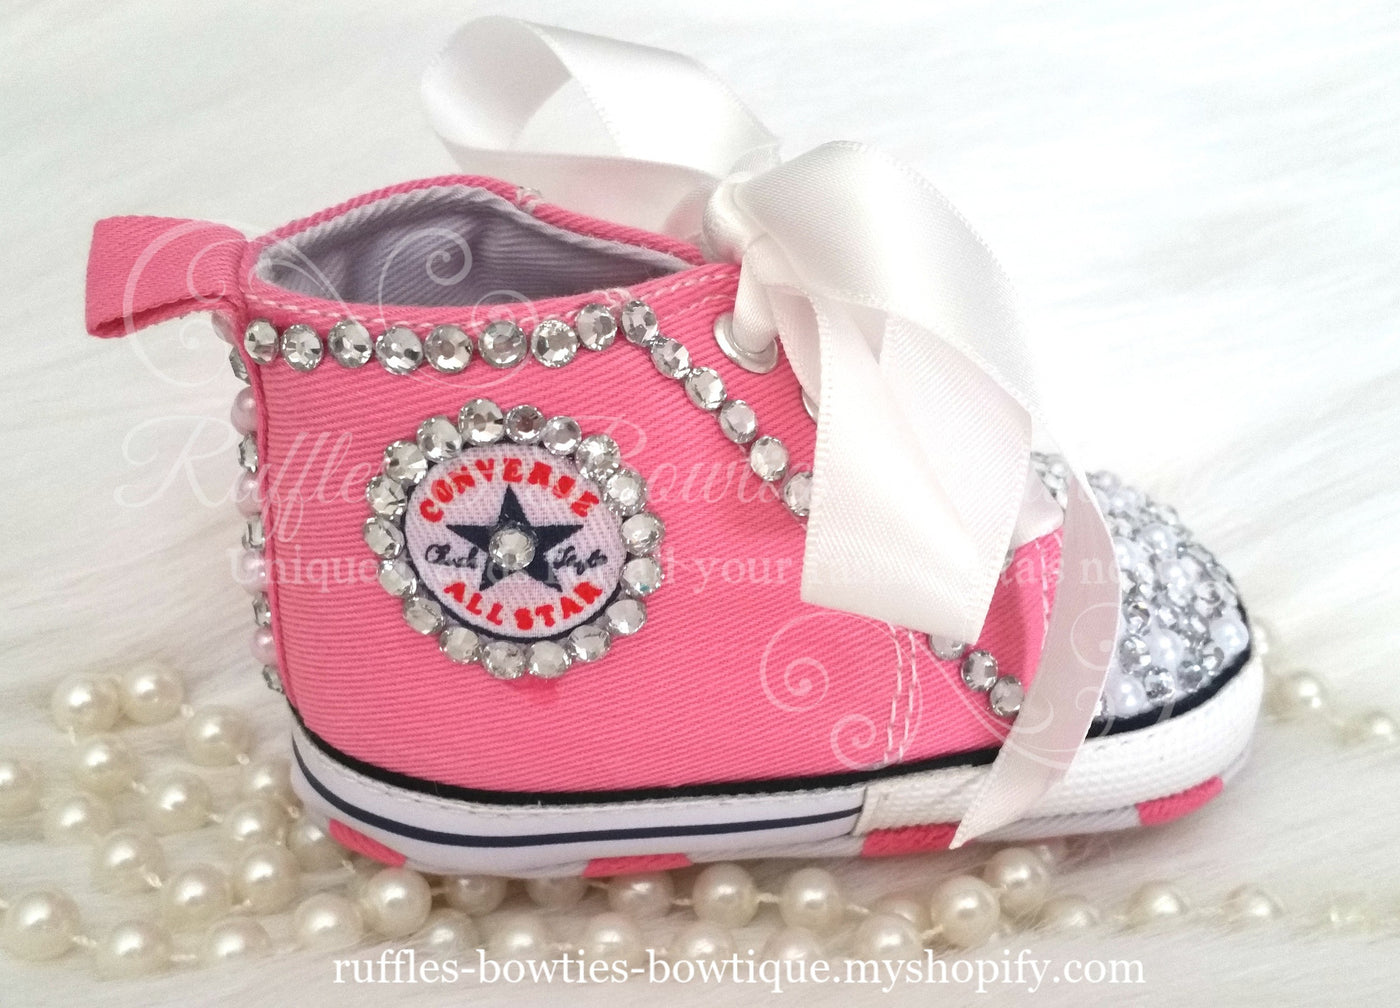 Crystal & Pearl Baby Converse High Tops Crystal Shoes - Pre Walker Shoes - Baby Girl Shoes - Wedding - Christening - Baptism - Baby - Hot Pink | Ruffles & Bowties Bowtique